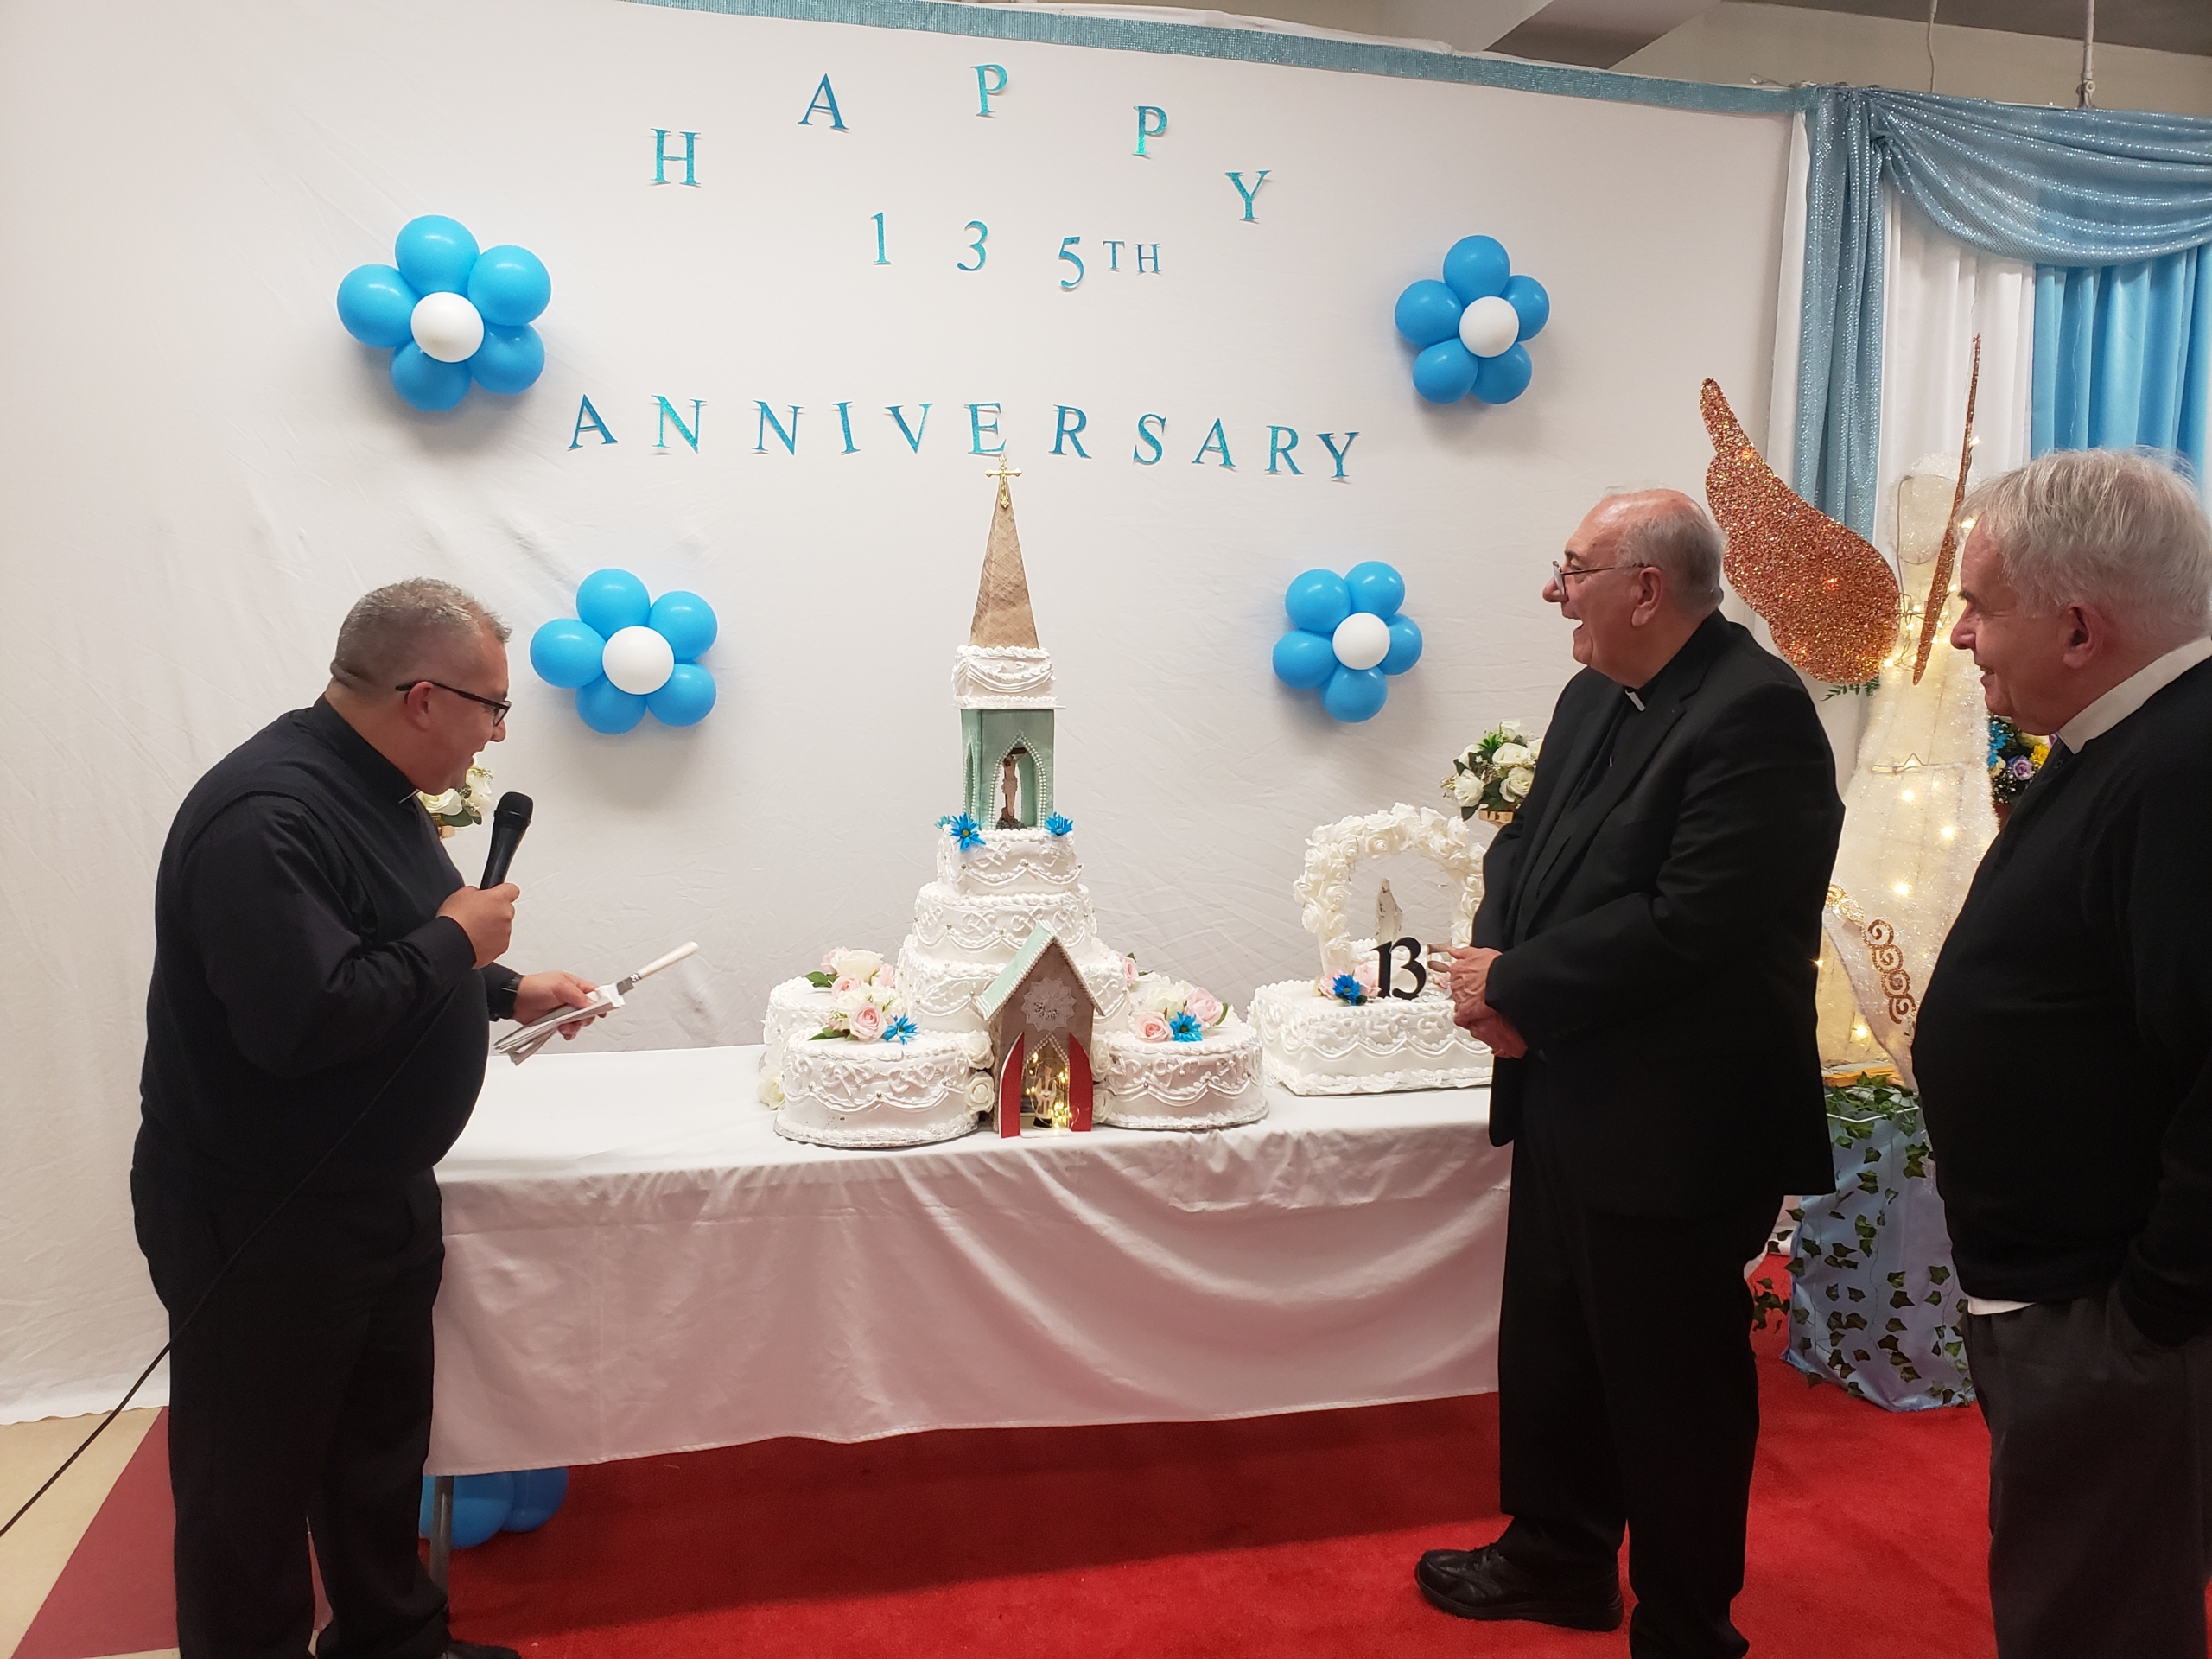 Two men standing in front of a table with cake on it.